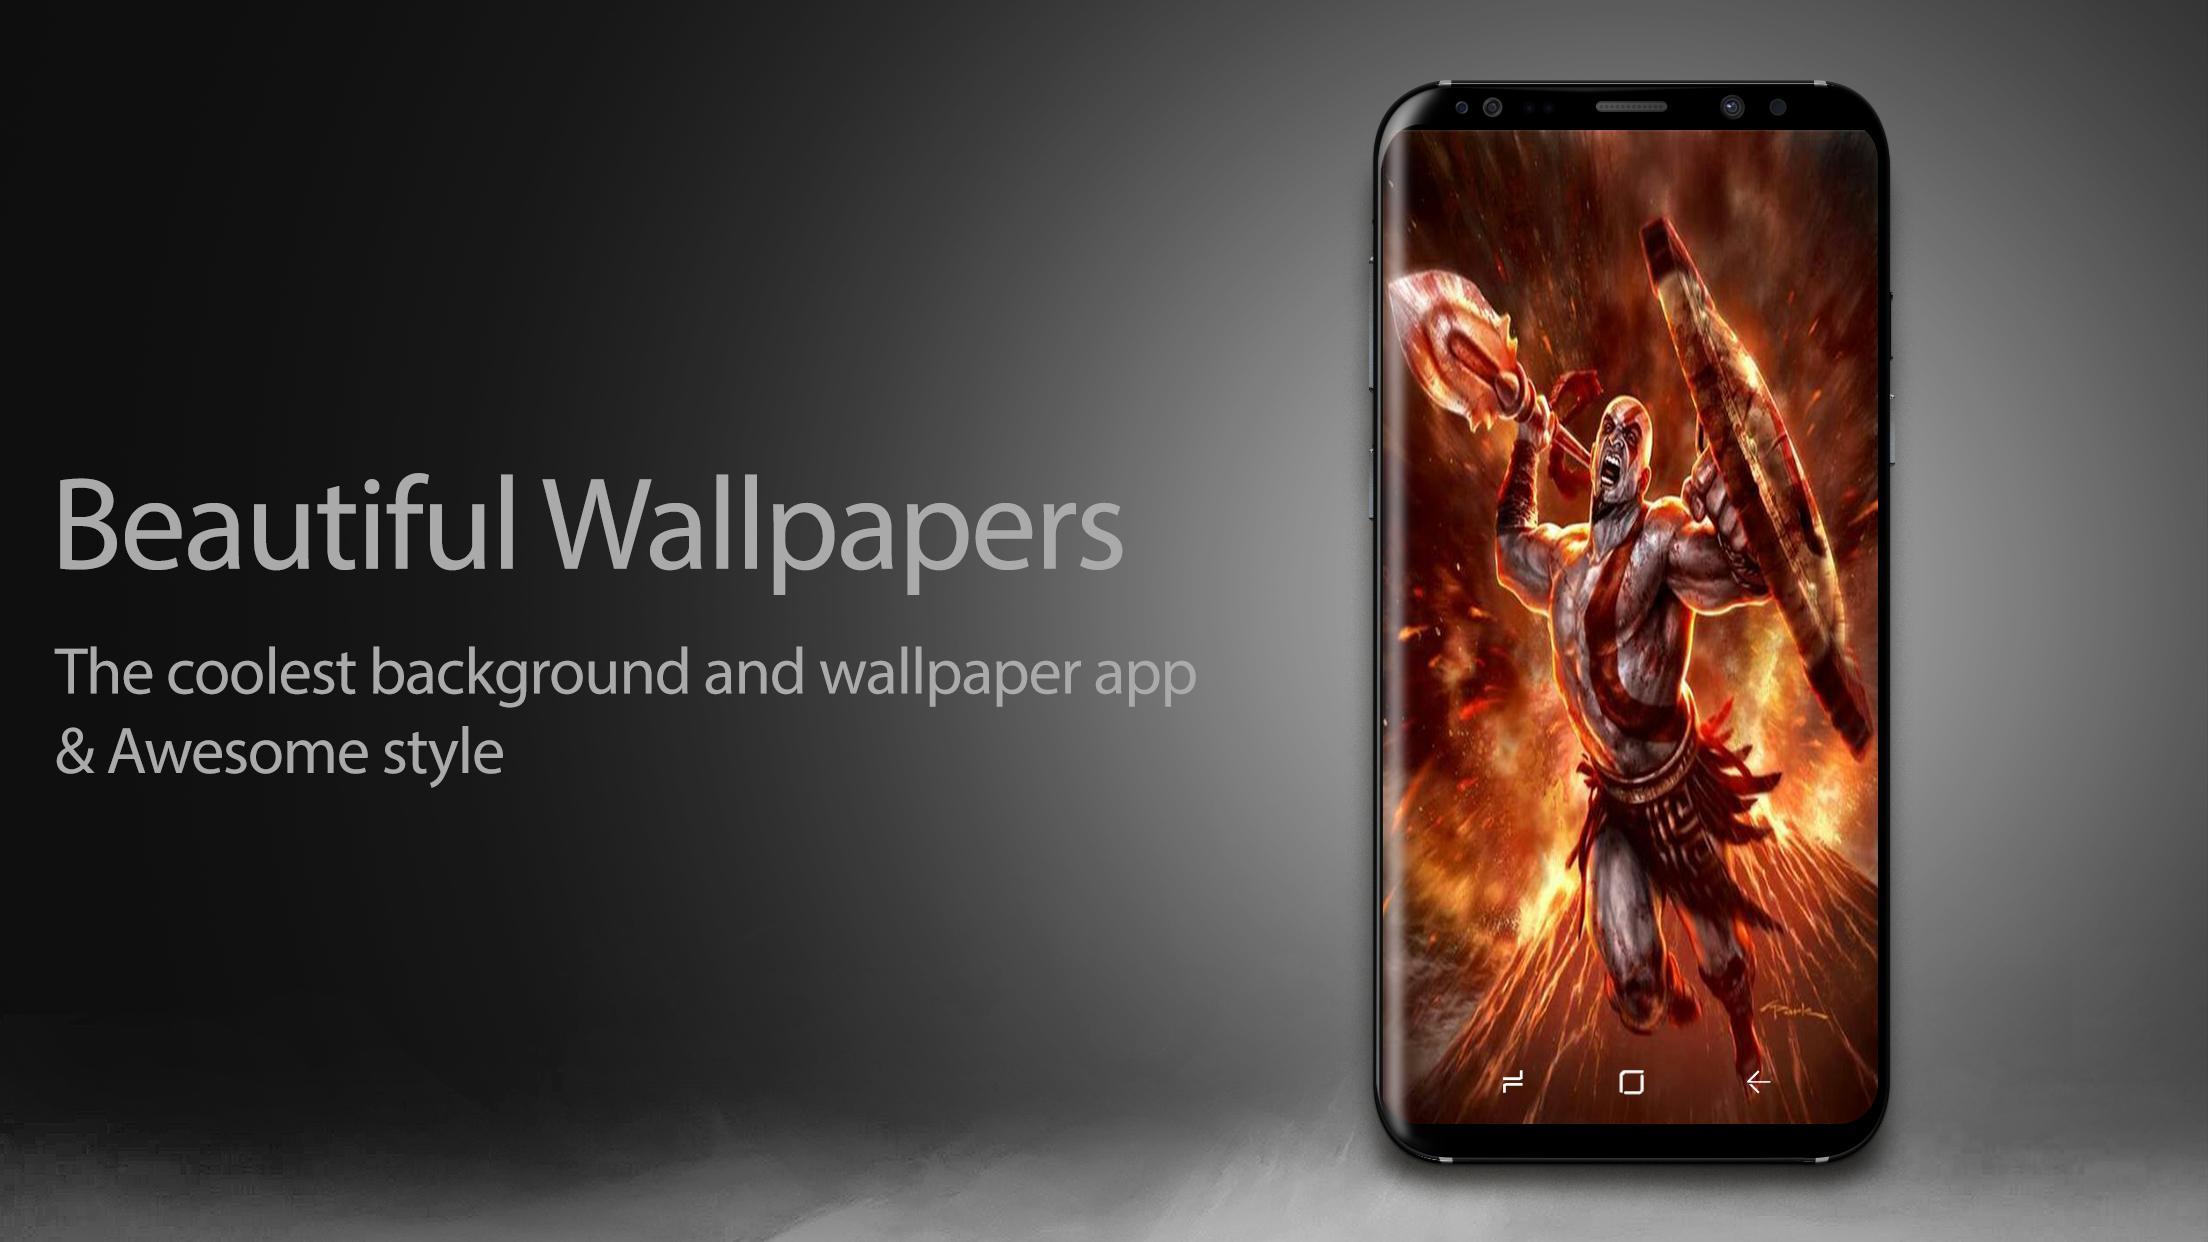 God Of War Wallpapers Backgrounds Hd 4k For Android Apk Download